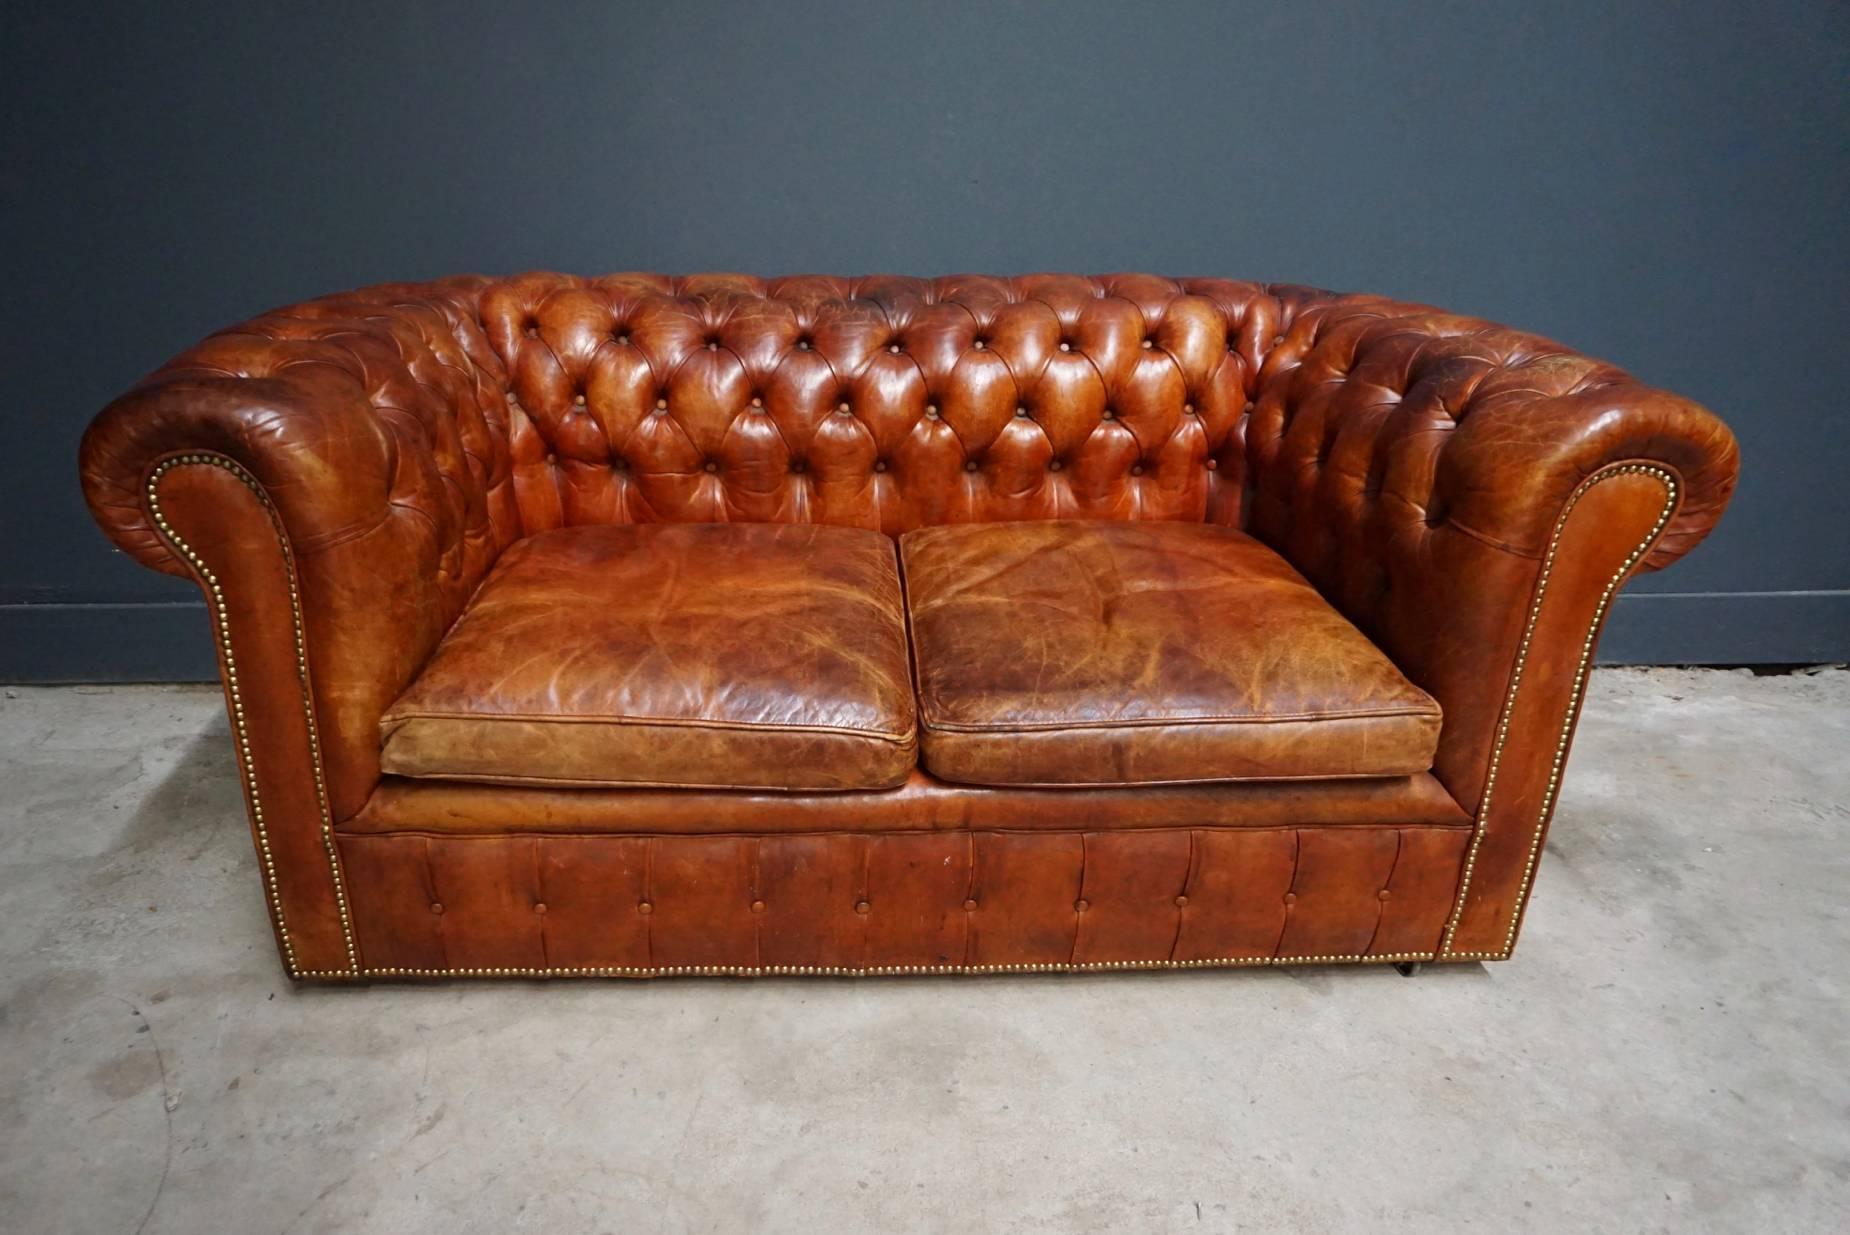 This vintage Chesterfield sofa was handmade in England, circa 1950-1960. The piece is upholstered in hand dyed cognac brown leather. The Chesterfield features loose cushions. It remains in a good vintage condition and retained a rich patina over the